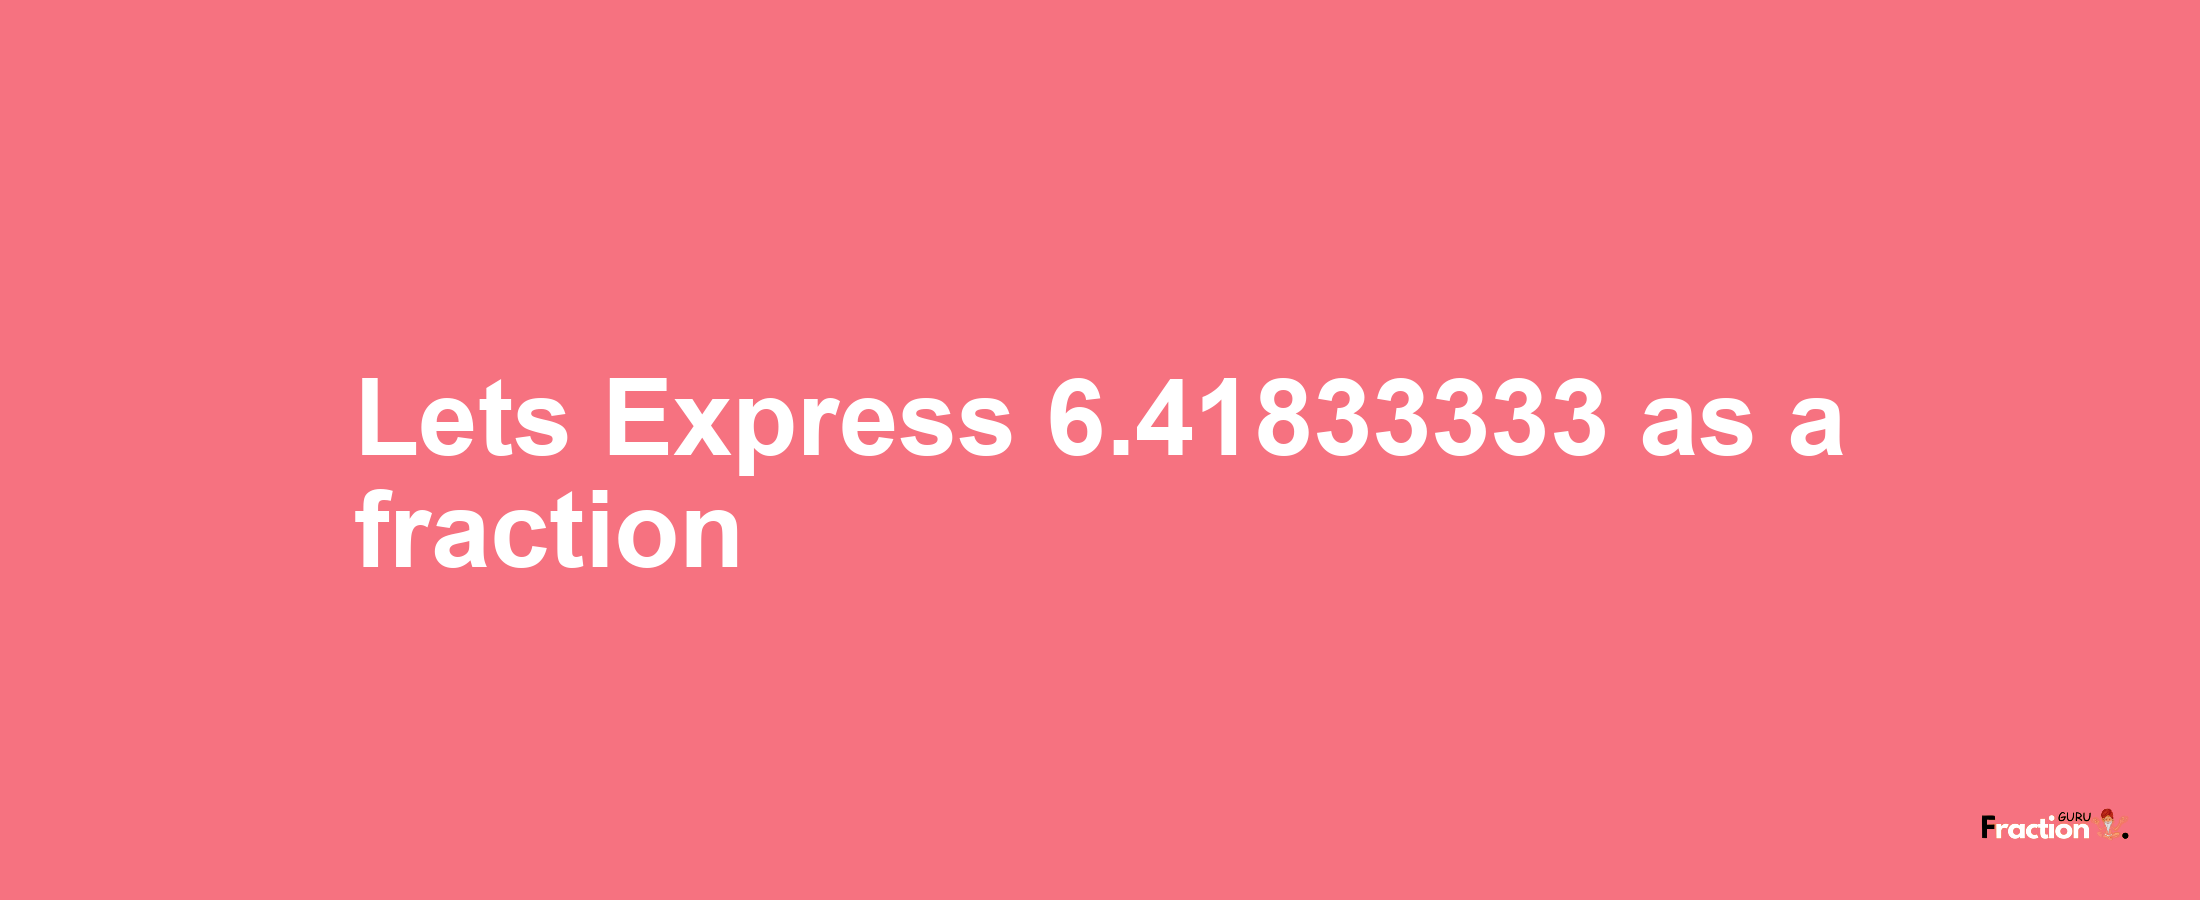 Lets Express 6.41833333 as afraction